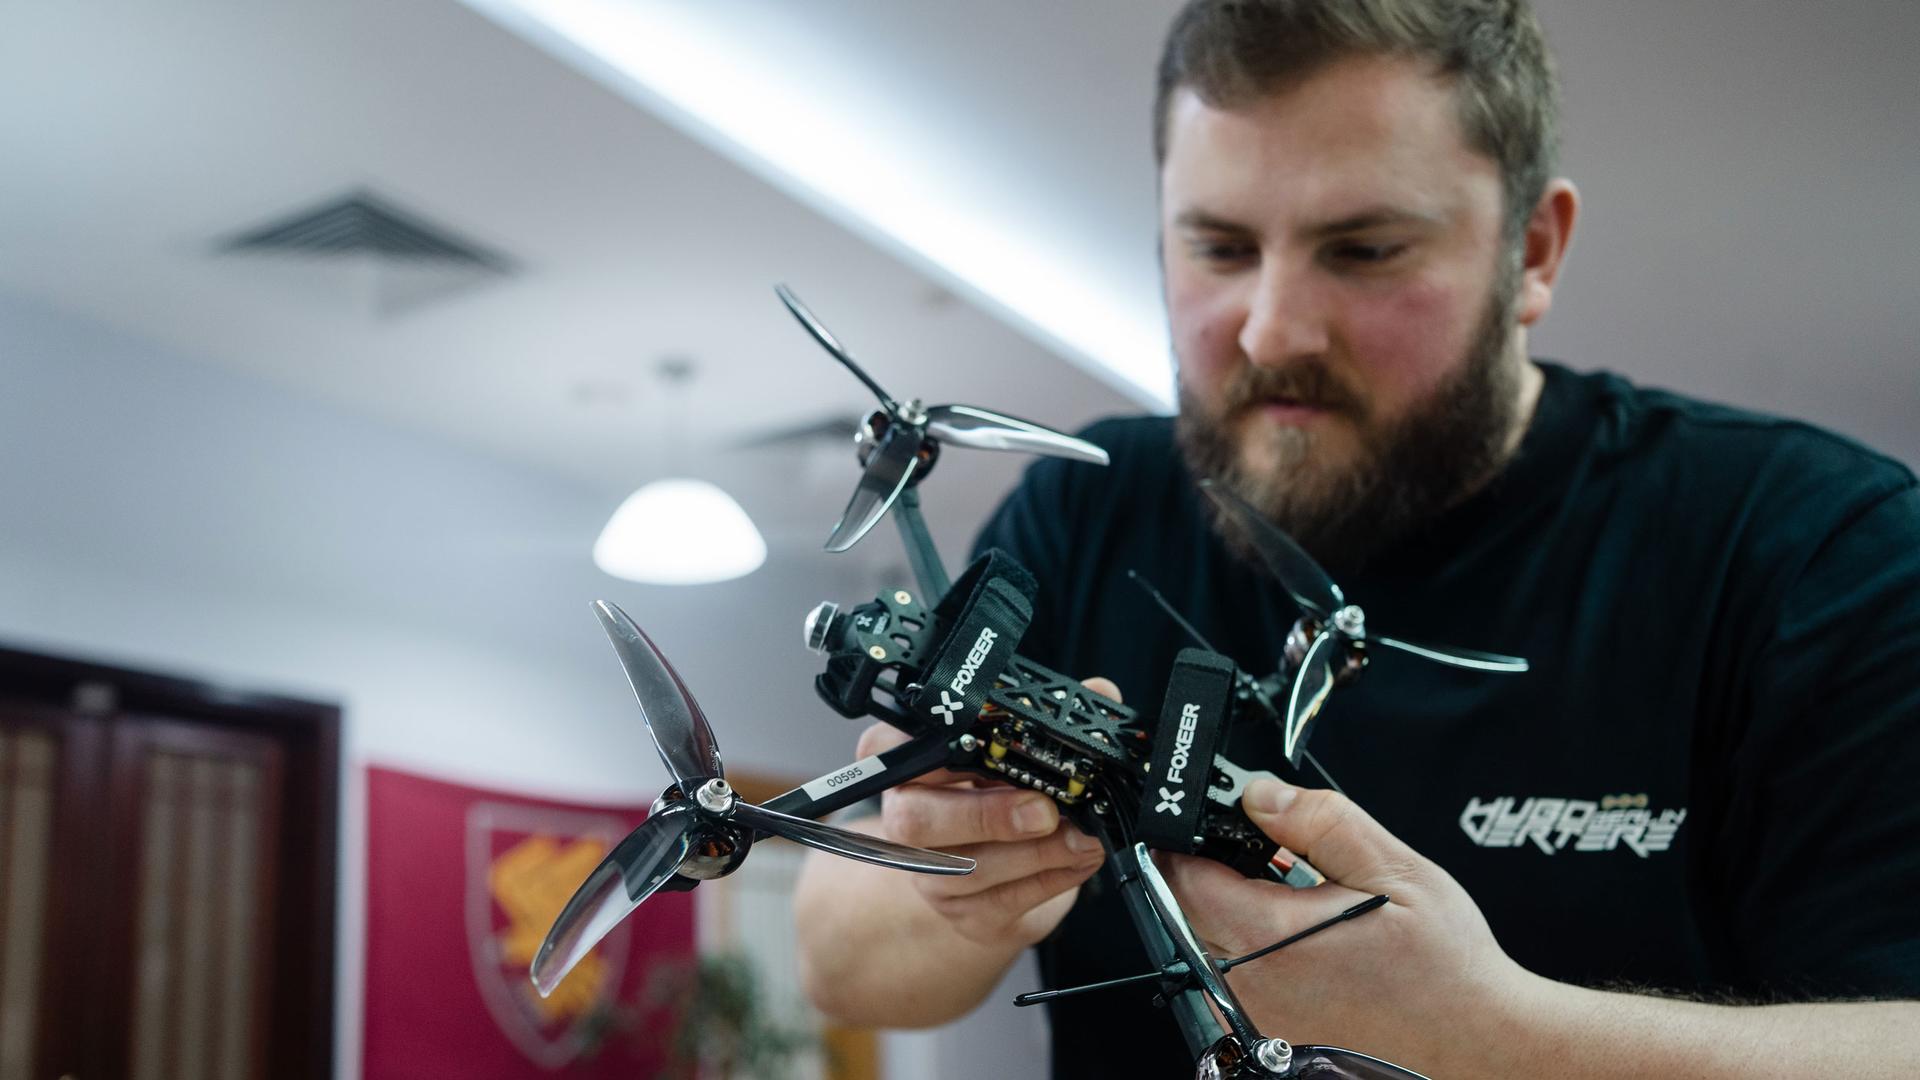 Bohdan Danyliv is the drone project coordinator with the Prytula Foundation, a Kyiv-based non-profit that helps provide equipment for the Ukrainian military.